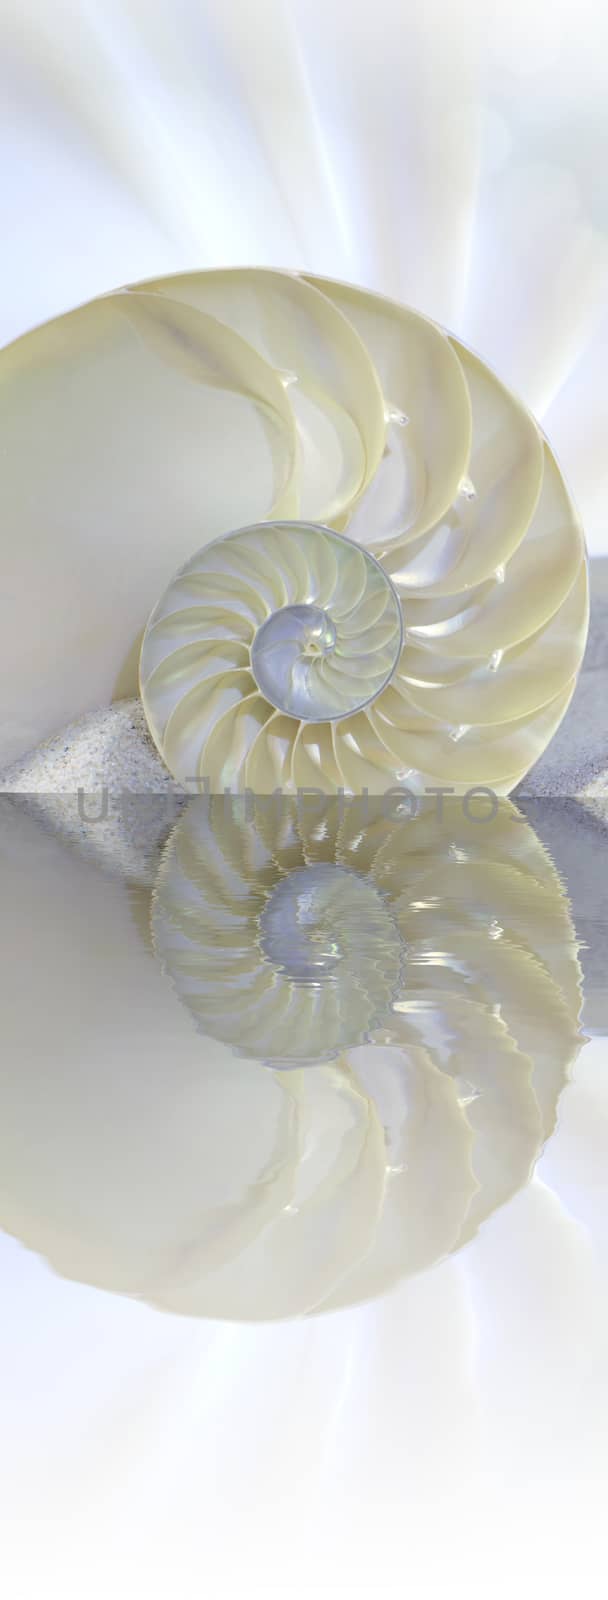 Chambered Nautilus cutaway Shell on beach reflected in water